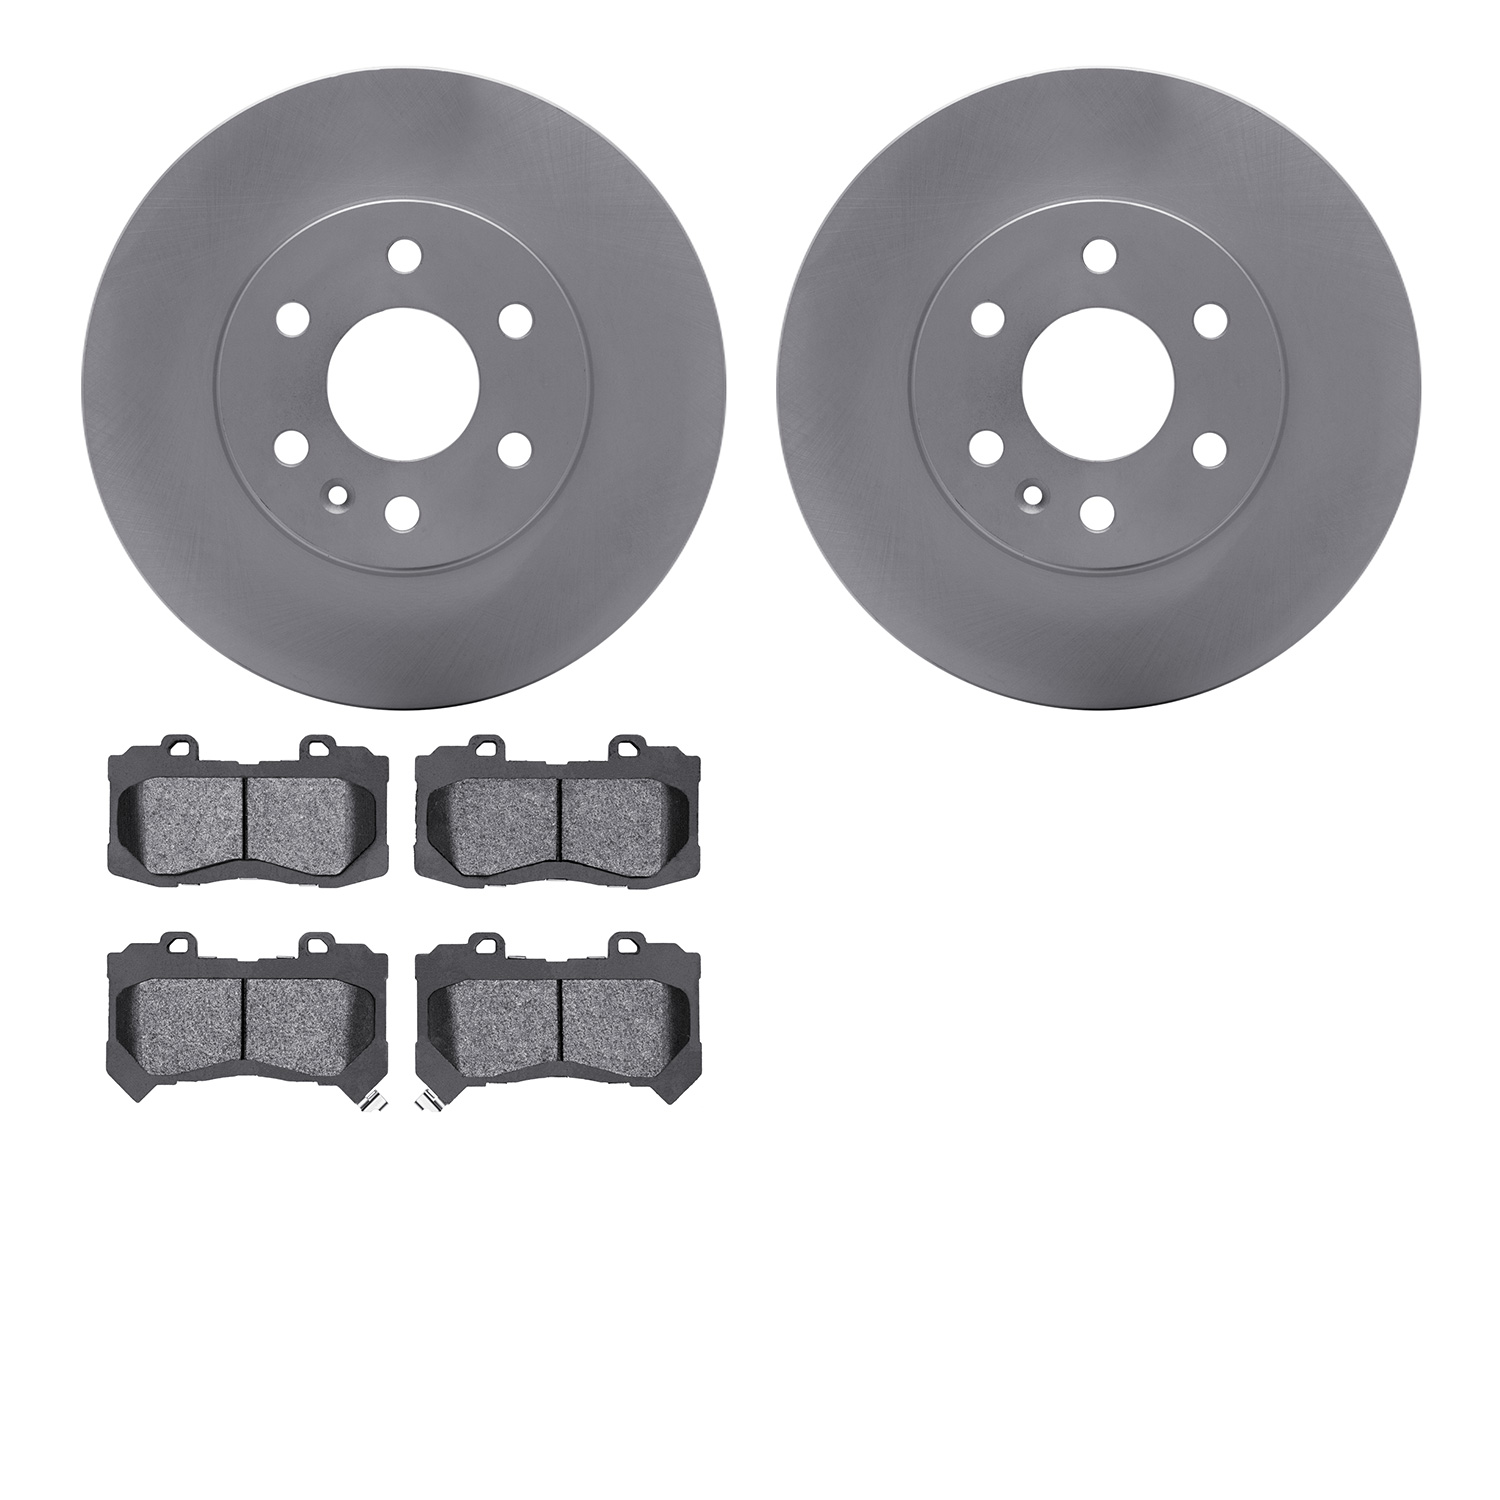 4402-48033 Geospec Brake Rotors with Ultimate-Duty Brake Pads Kit, 2015-2020 GM, Position: Front